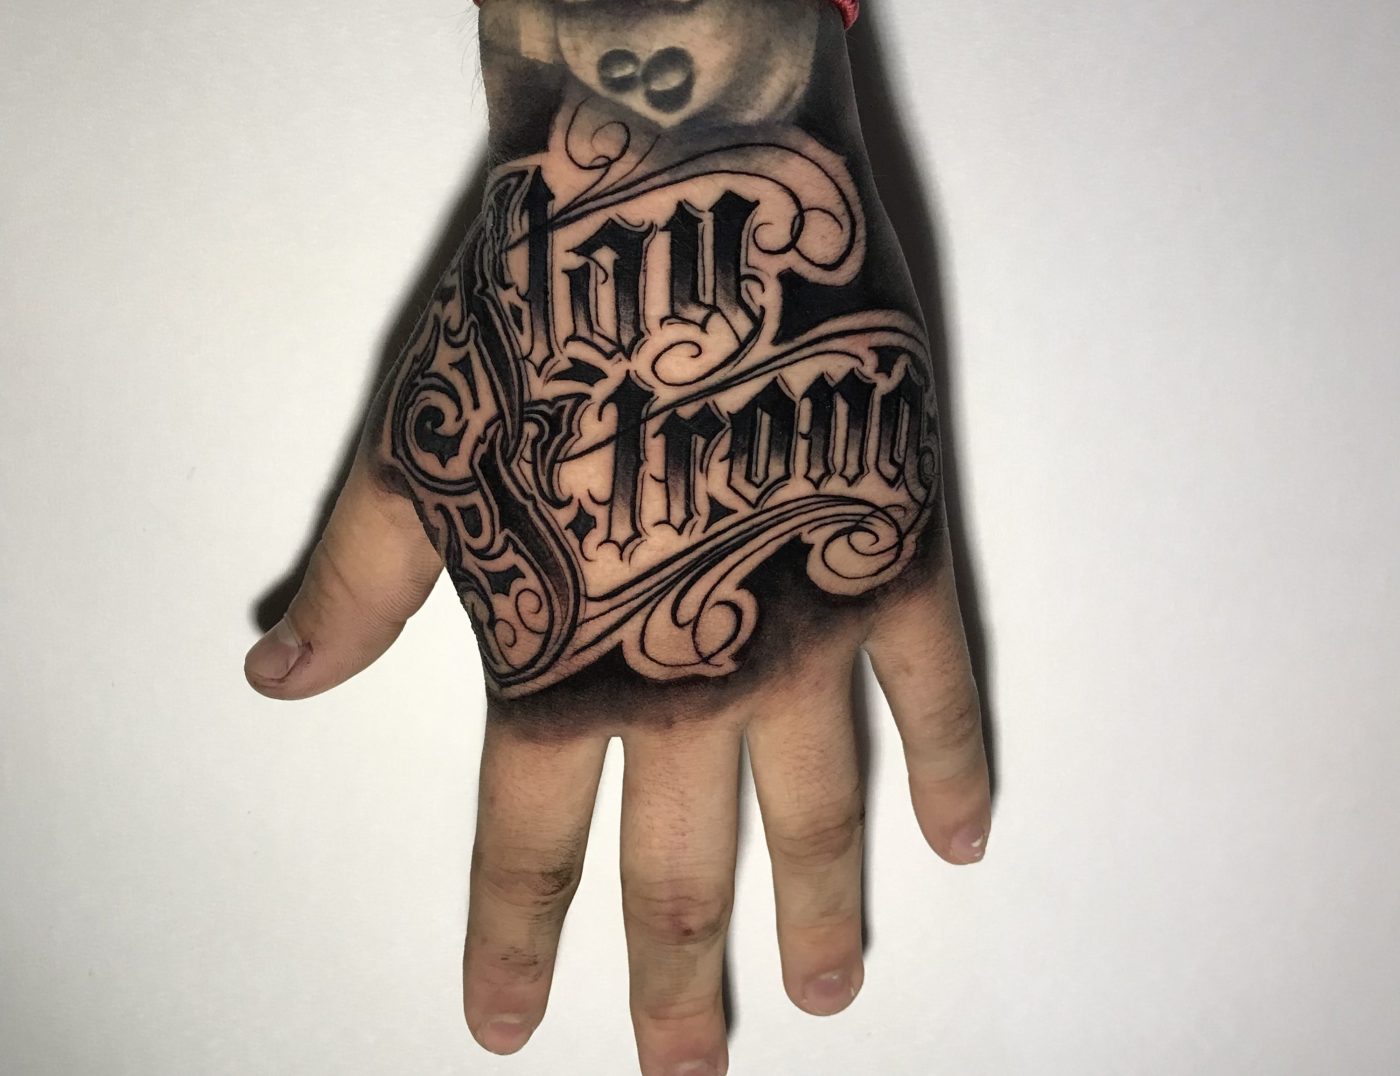 "Stay Strong" Script Lettering Tattoo By Rene Cristobal At Iron Palm Tattoos. Rene is an international tattoo artist from Concepcion, Chile. He specializes in many styles including blackwork and black & gray tattoos.